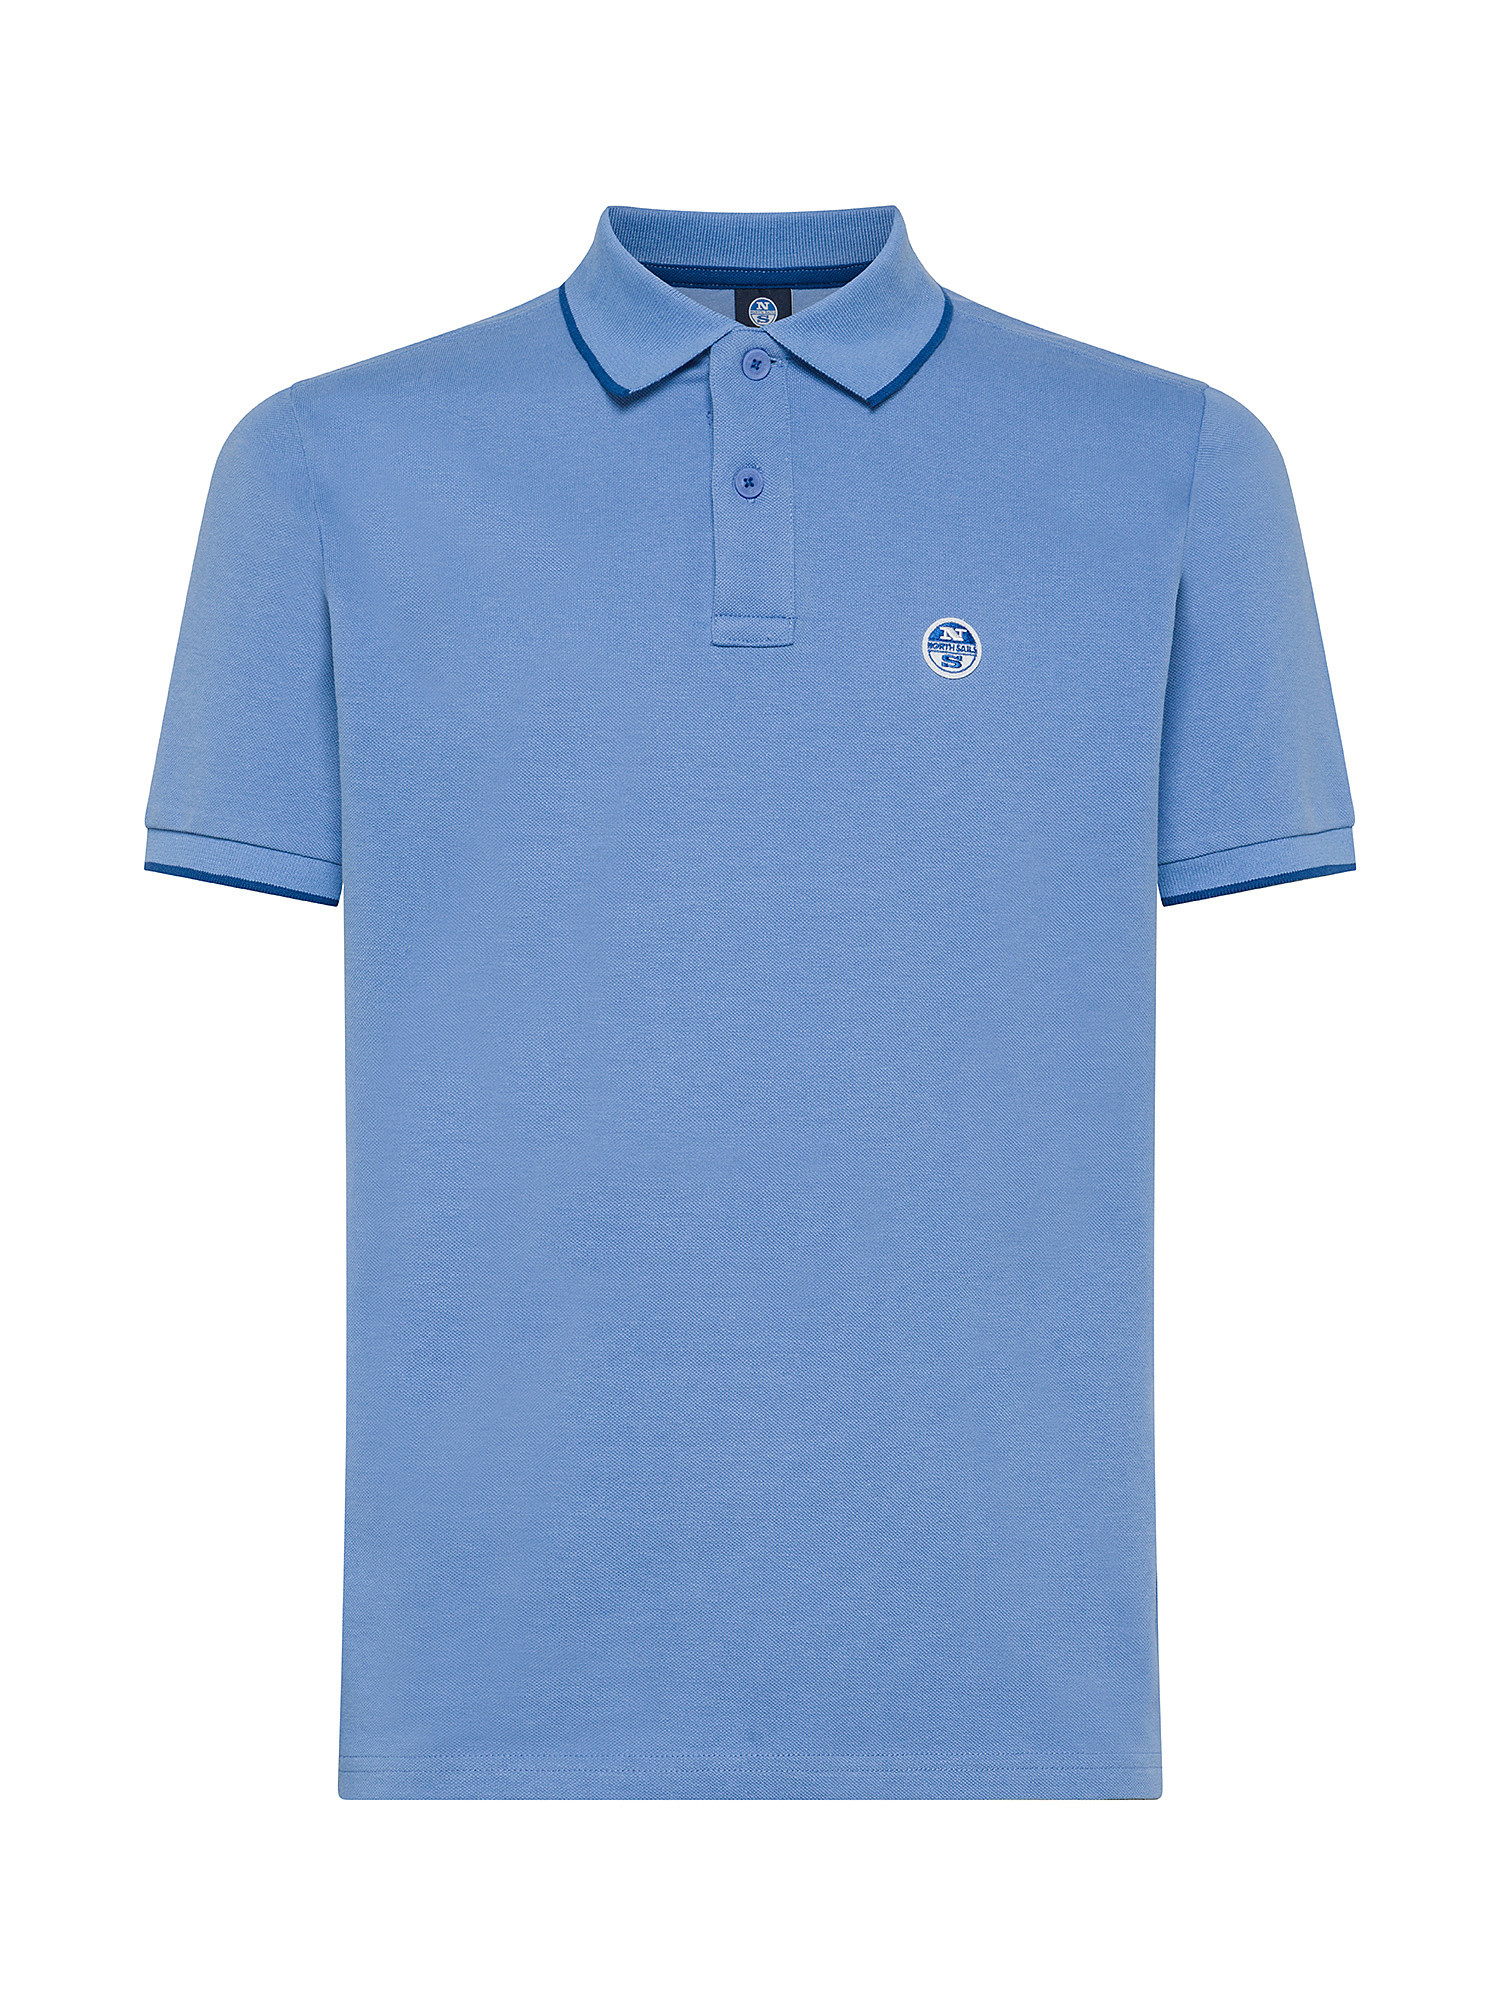 North Sails - Organic cotton piqué polo shirt with micrologo, Light Blue, large image number 0